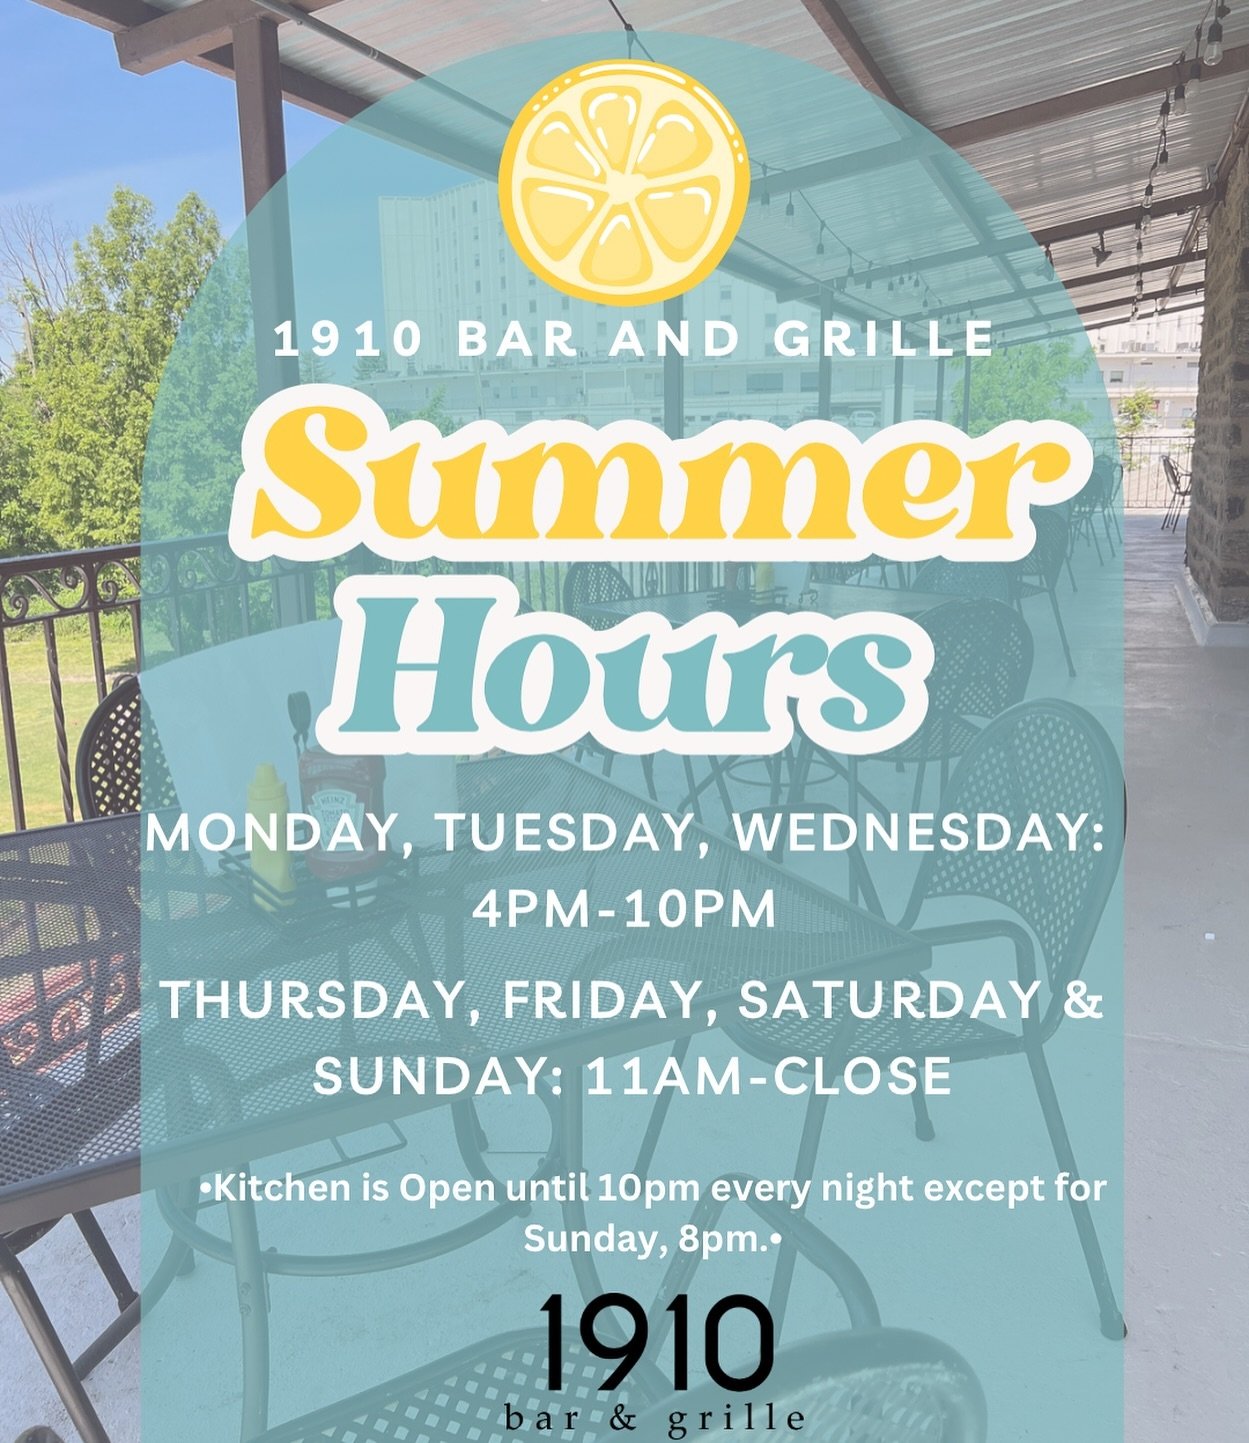 Starting next week- May 6th, We will be OPEN 7 days a week! That&rsquo;s right! 7 days a week to enjoy our beautiful deck, delicious food &amp; tasty cocktails! We are so excited for this summer!🍻🍸🌞🕶️